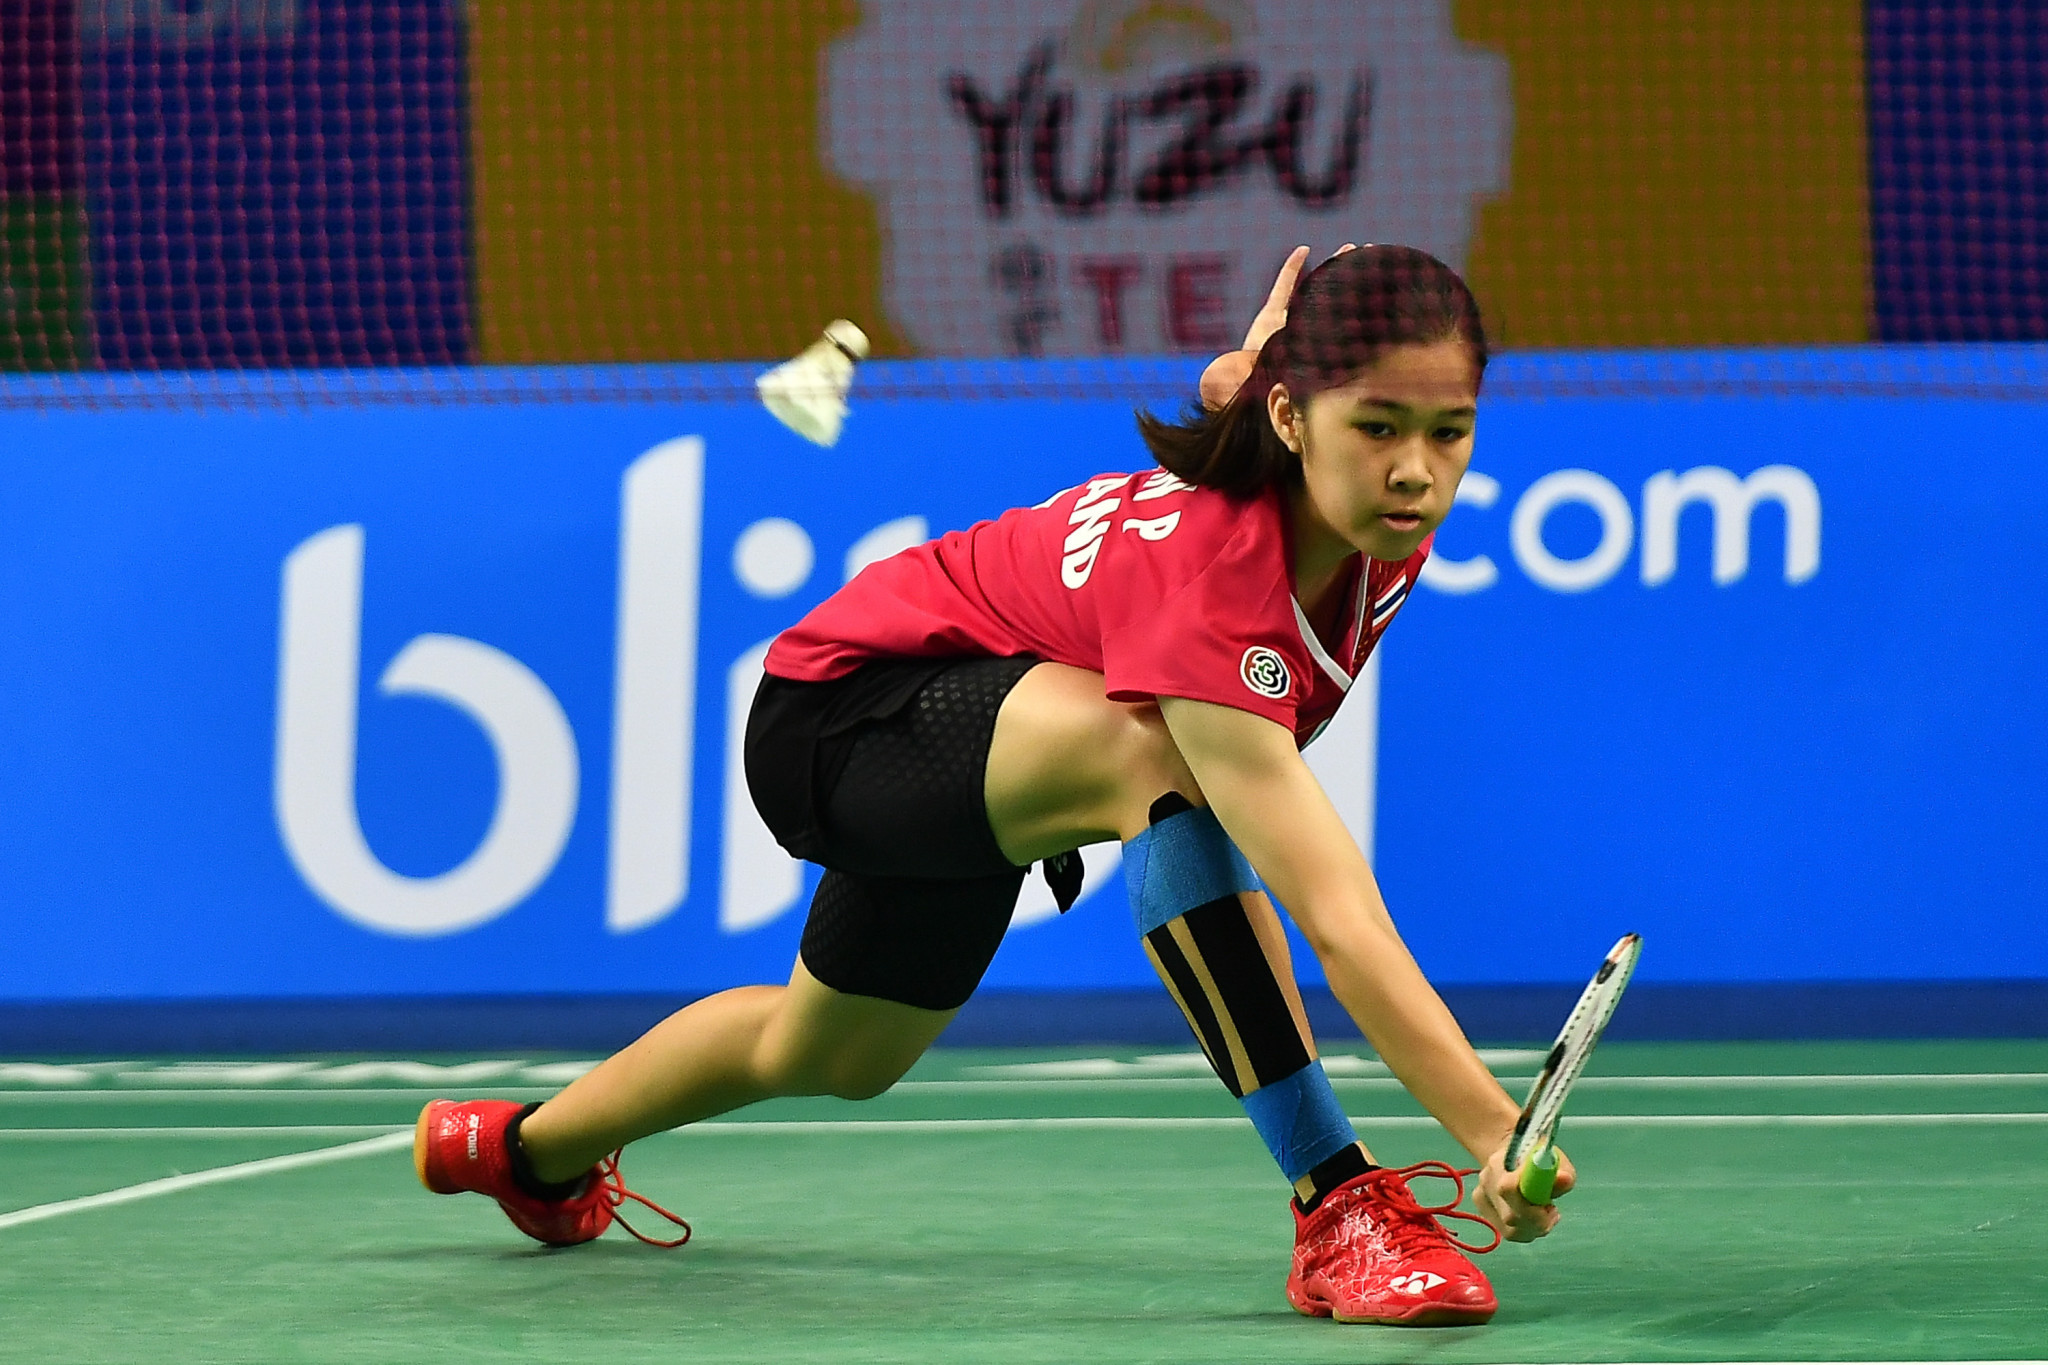 Top seed crashes out of the Badminton World Junior Championships